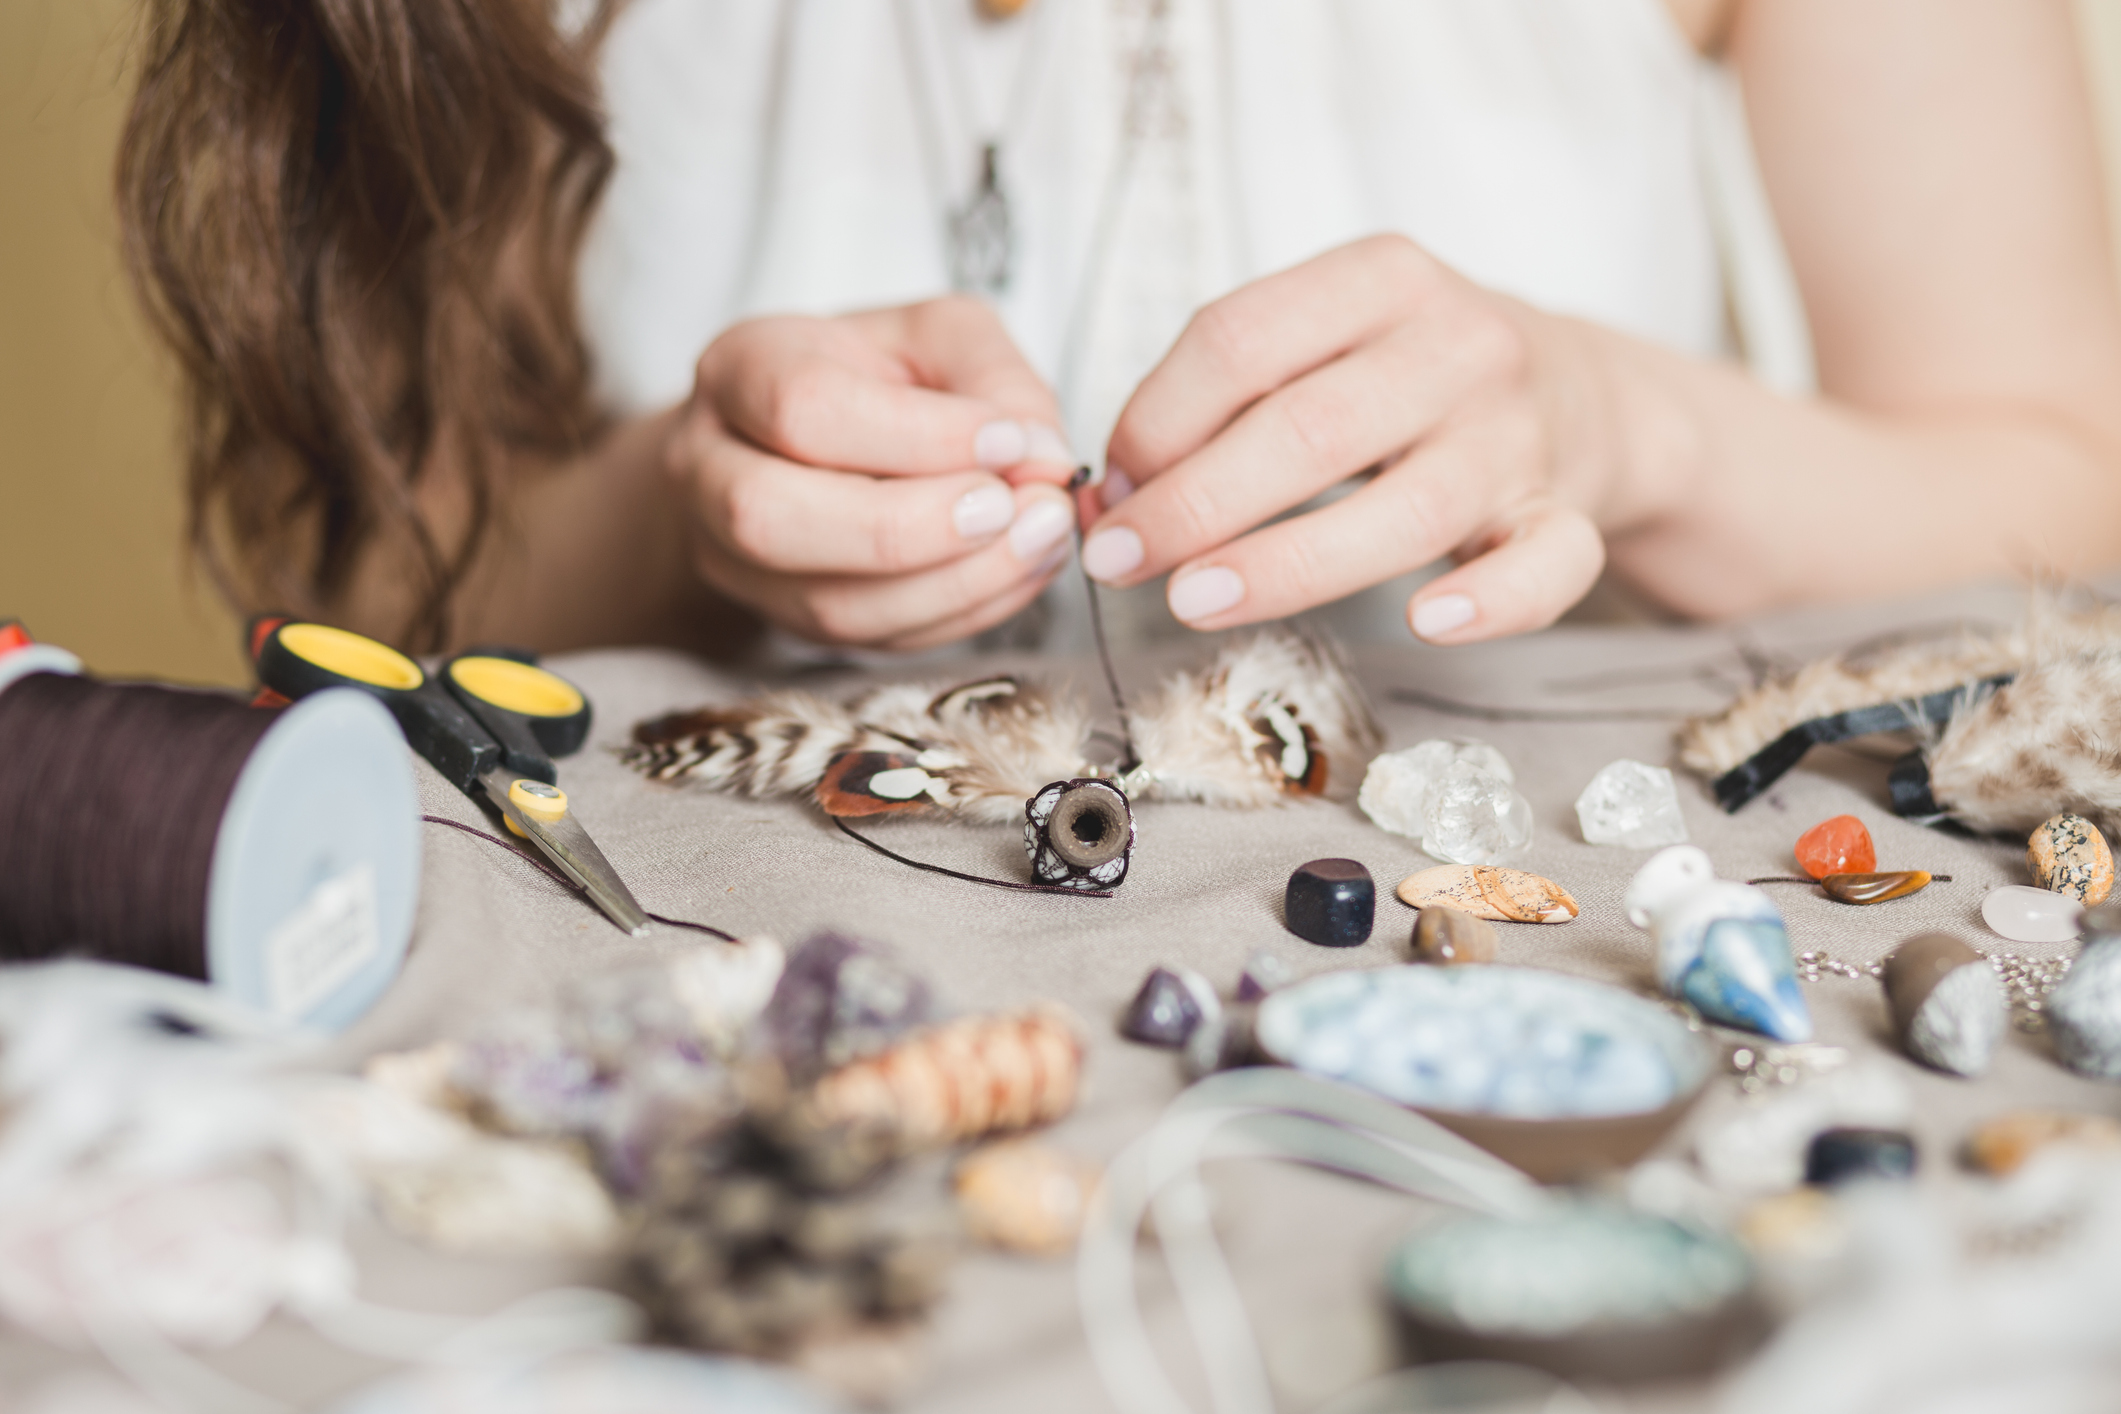 woman making beaded craft and reviewing tax issues related to hobbies